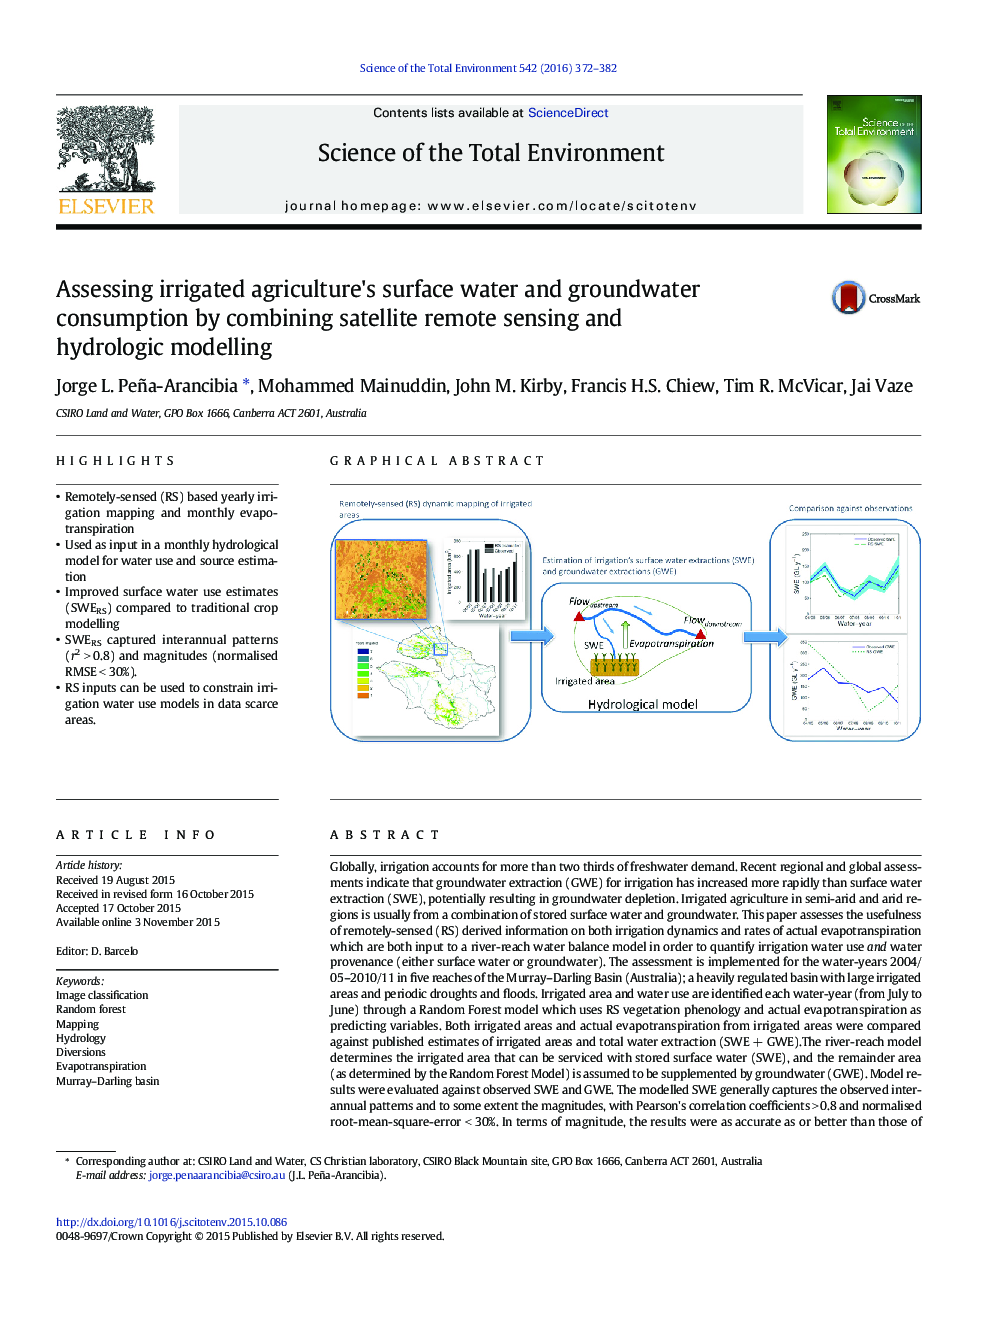 Assessing irrigated agriculture's surface water and groundwater consumption by combining satellite remote sensing and hydrologic modelling